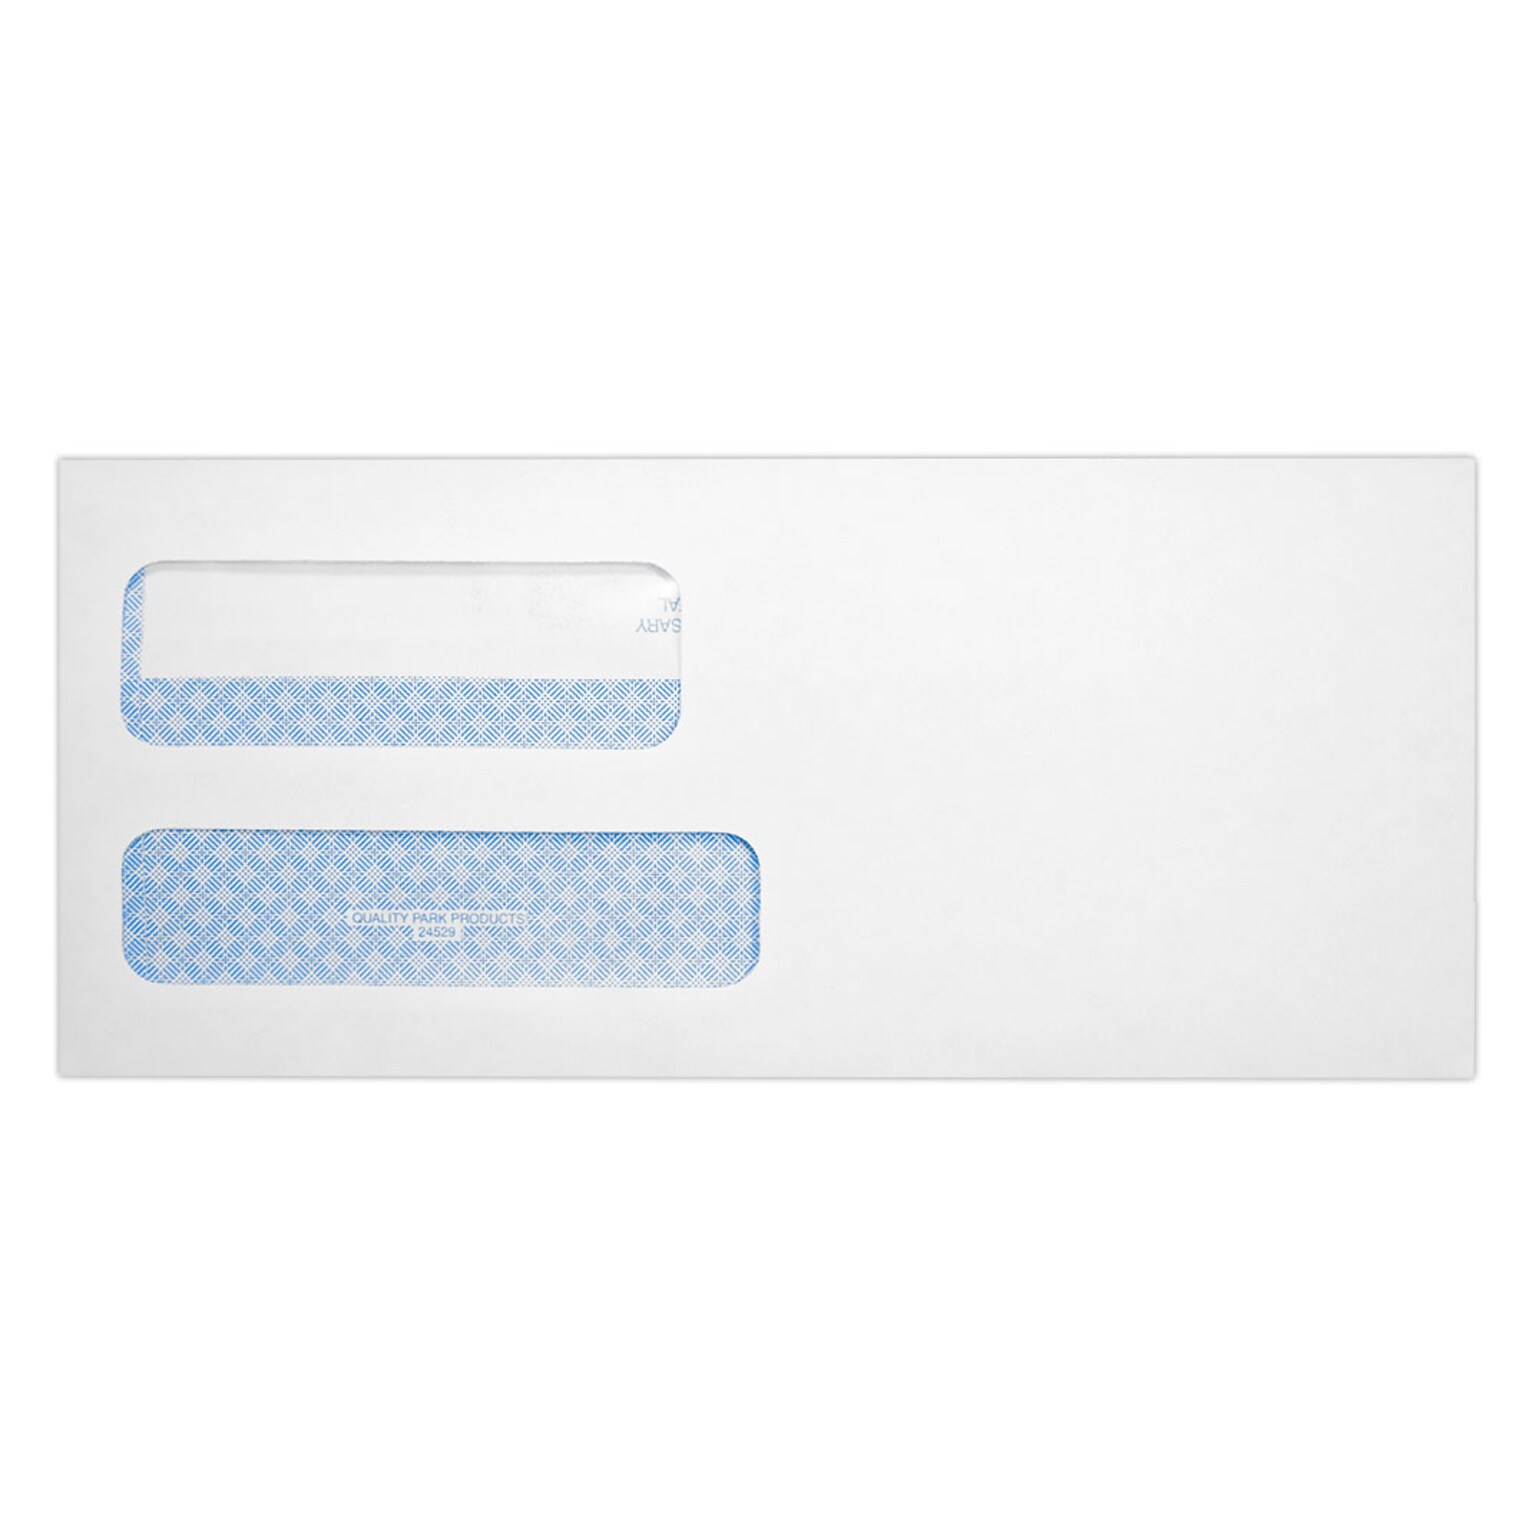 Quality Park Redi-Seal Self Seal Security Tinted #9 Double Window Envelope, 3 7/8 x 8 7/8, White Wove, 1000/Pack (24529-1000)